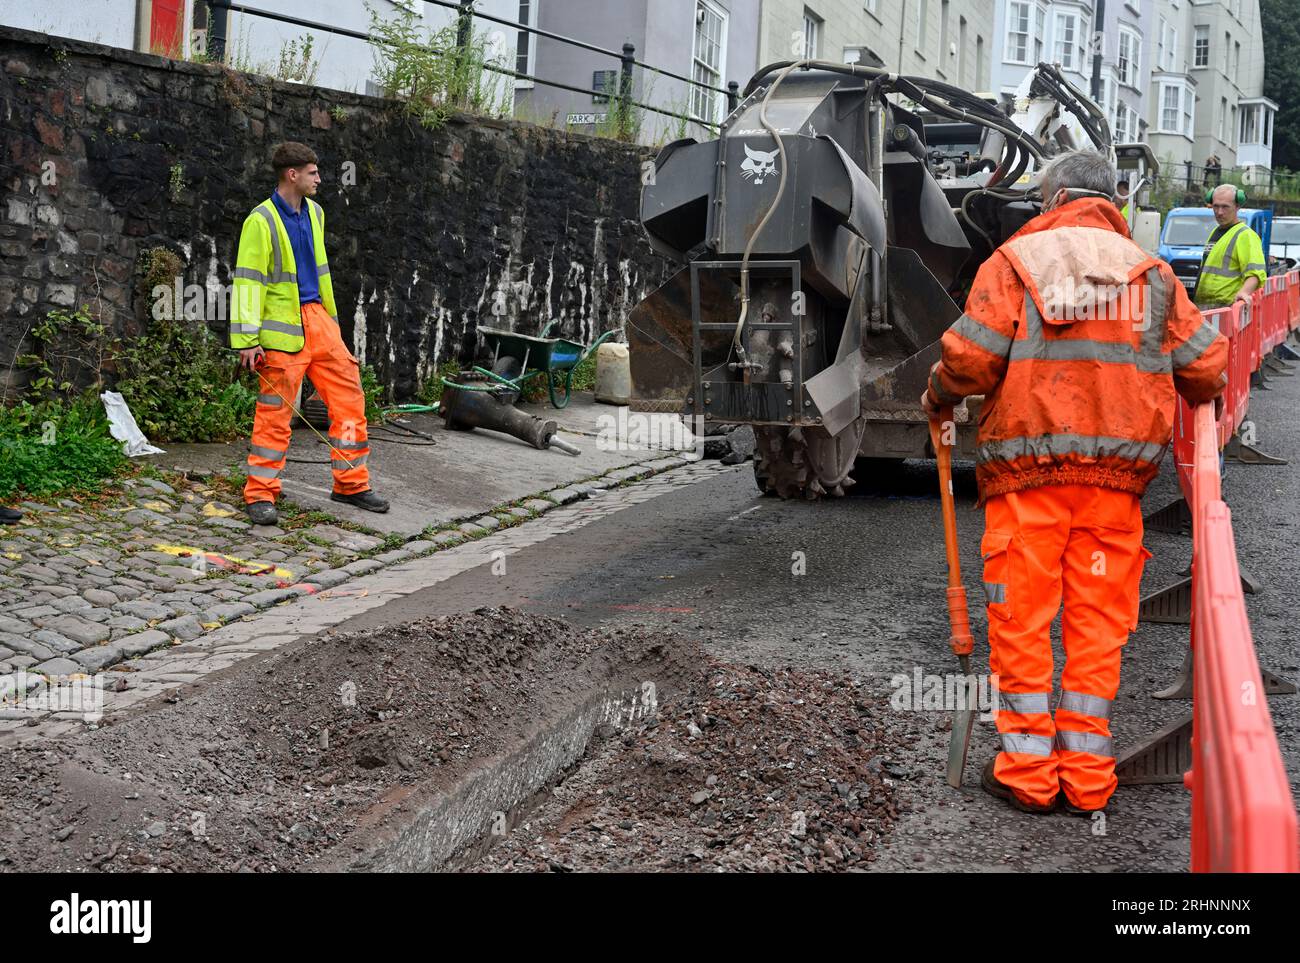 Trenching machine (Bobcat) being used for cutting channel through pavement in street to lay duck work for fibre optic cable, UK Stock Photo